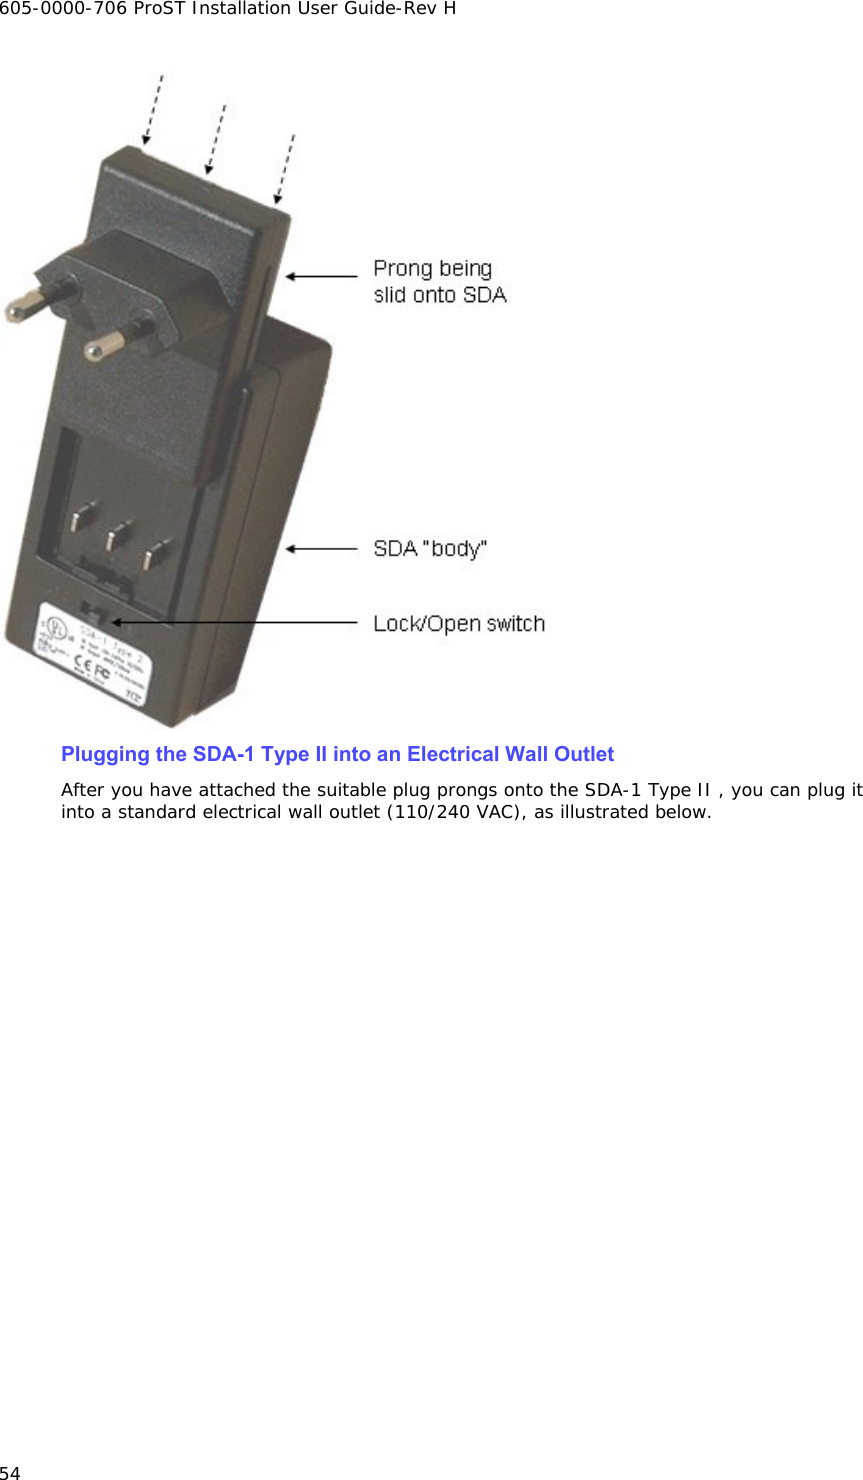 605-0000-706 ProST Installation User Guide-Rev H 54  Plugging the SDA-1 Type II into an Electrical Wall Outlet After you have attached the suitable plug prongs onto the SDA-1 Type II , you can plug it into a standard electrical wall outlet (110/240 VAC), as illustrated below.  